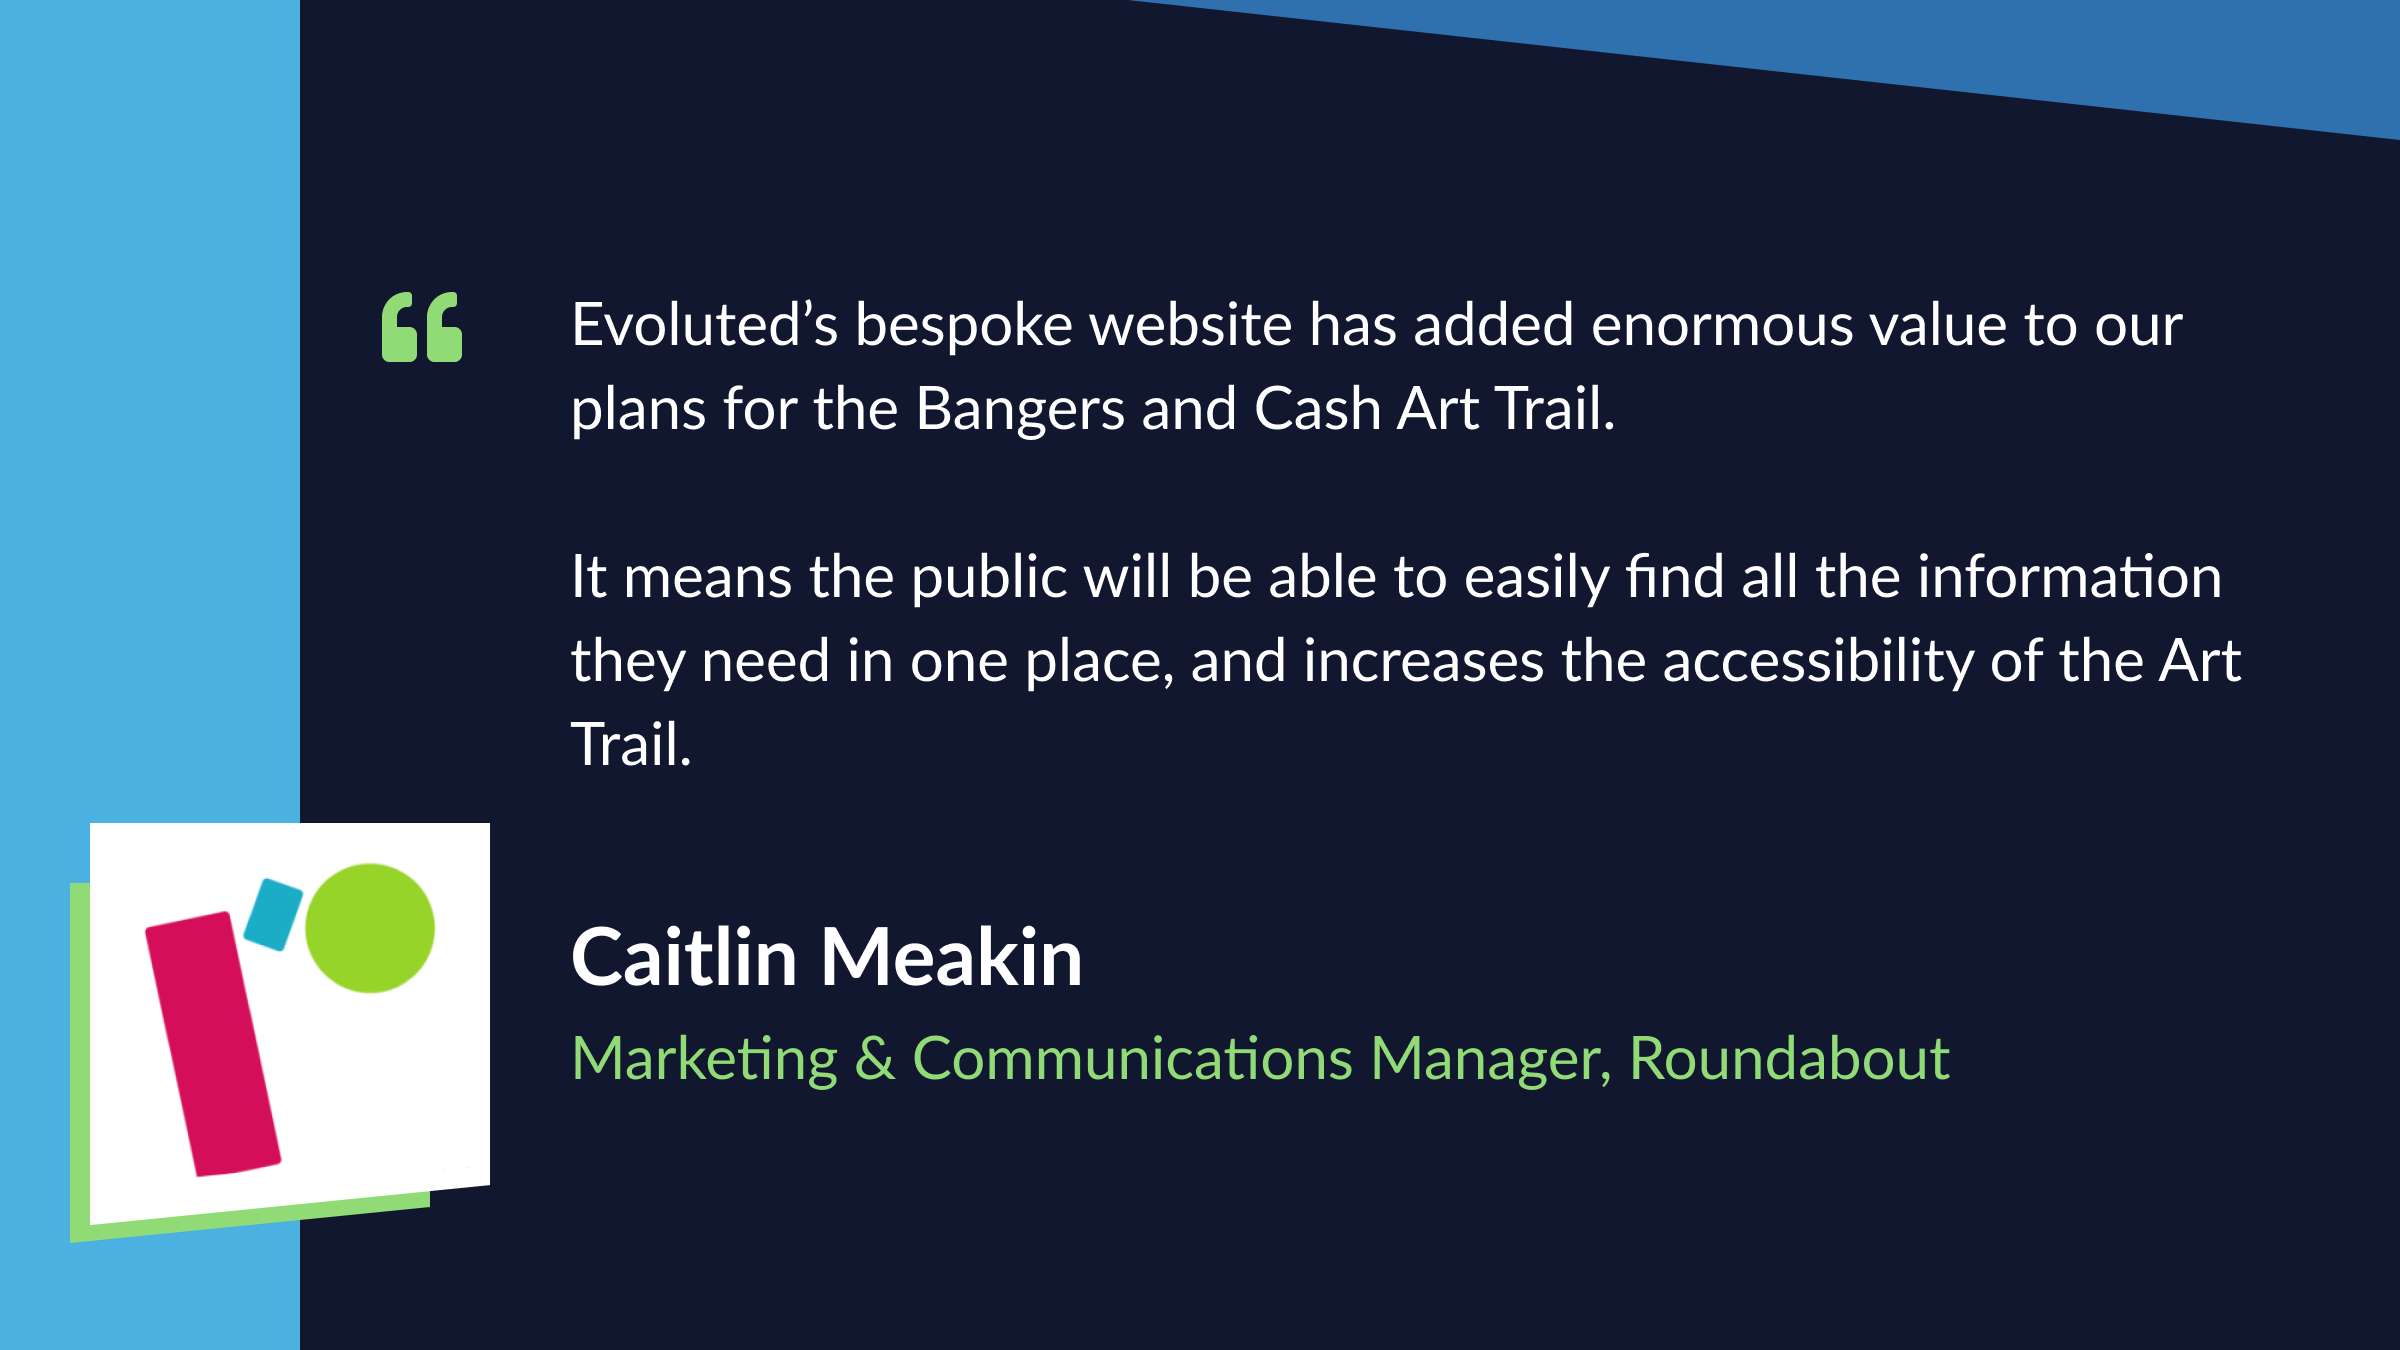 Testimonial from Caitlin Meakin - Marketing & Communications Manager, Roundabout